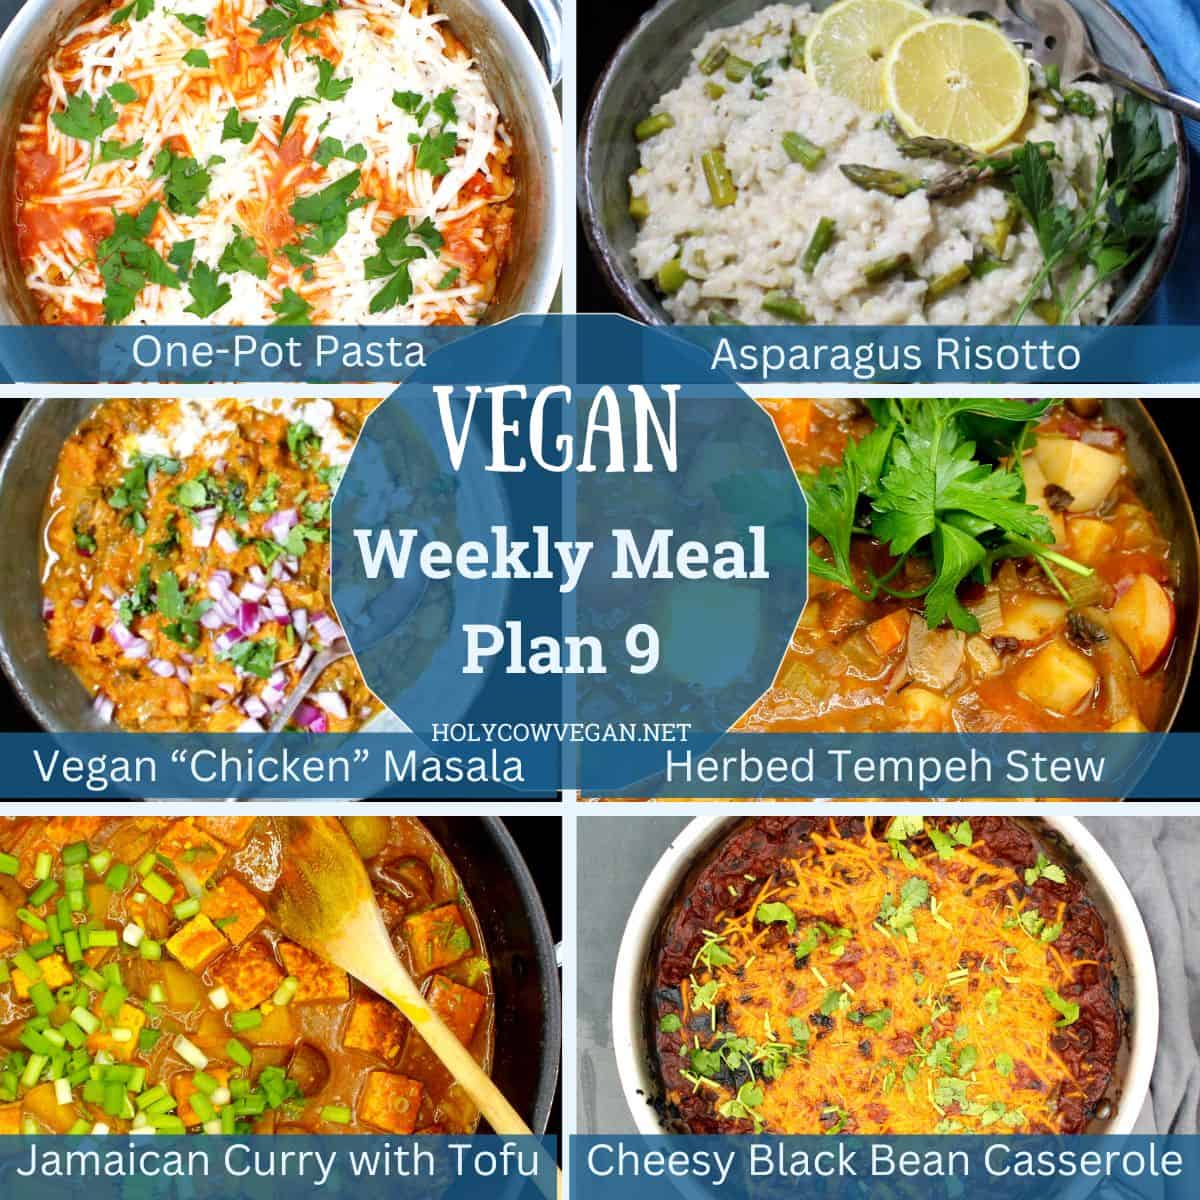 Images of 6 vegan dinners with text that says "vegan weekly meal plan 9".